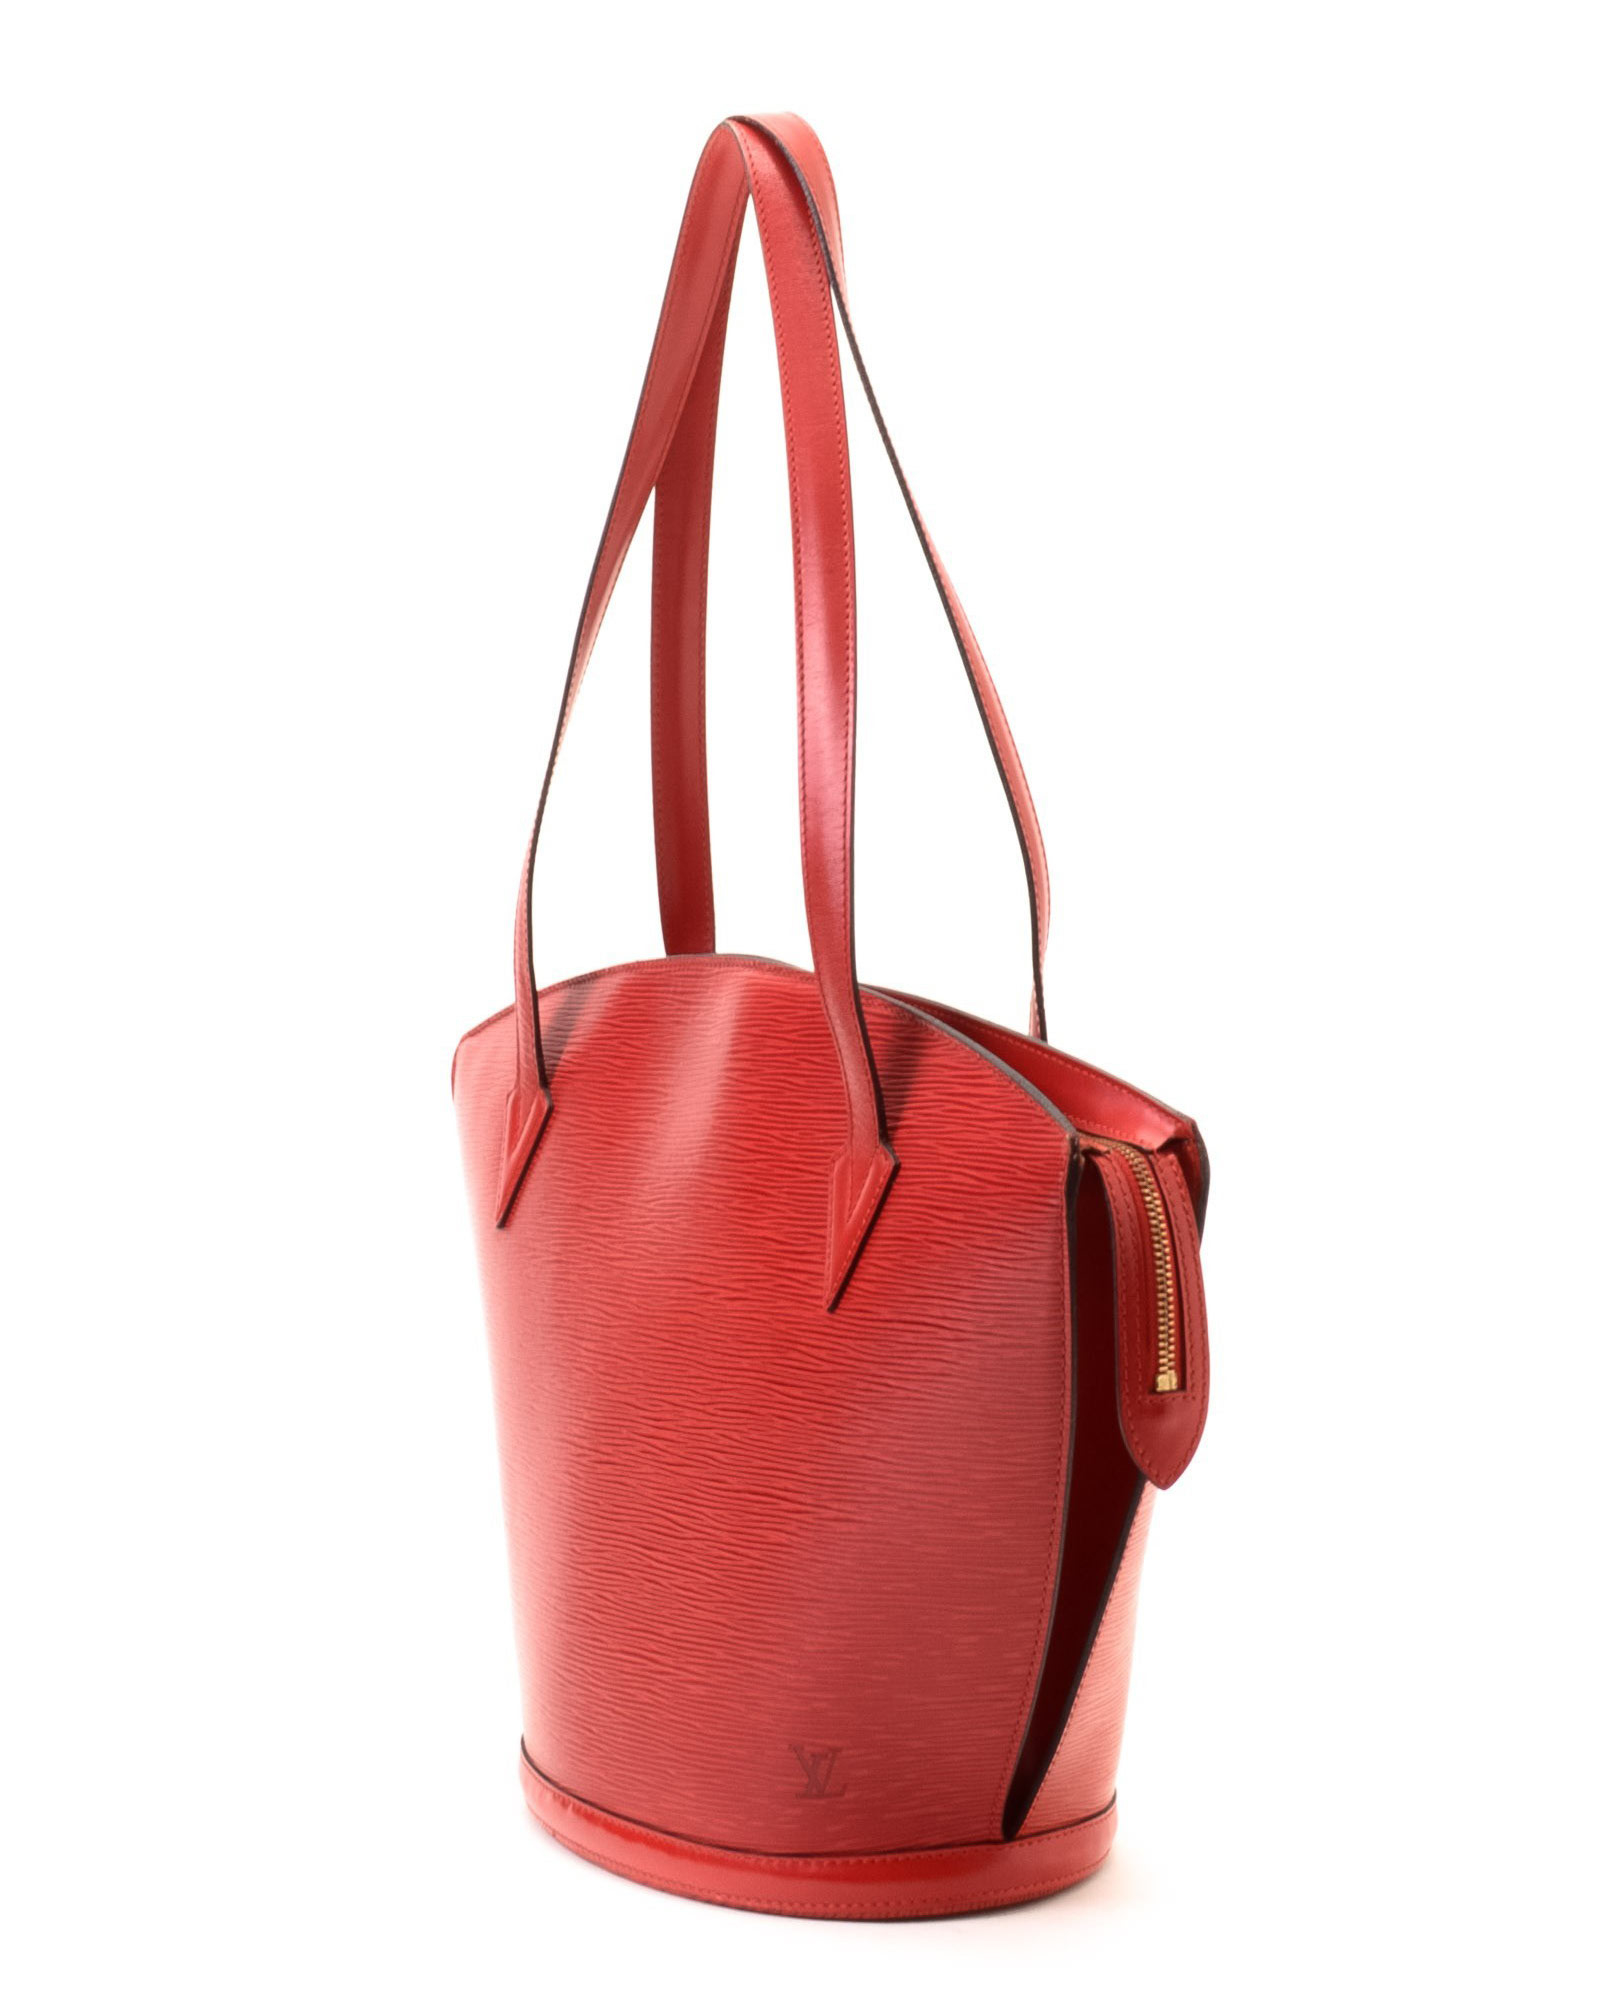 Lyst - Louis Vuitton Red Tote Bag - Vintage in Red